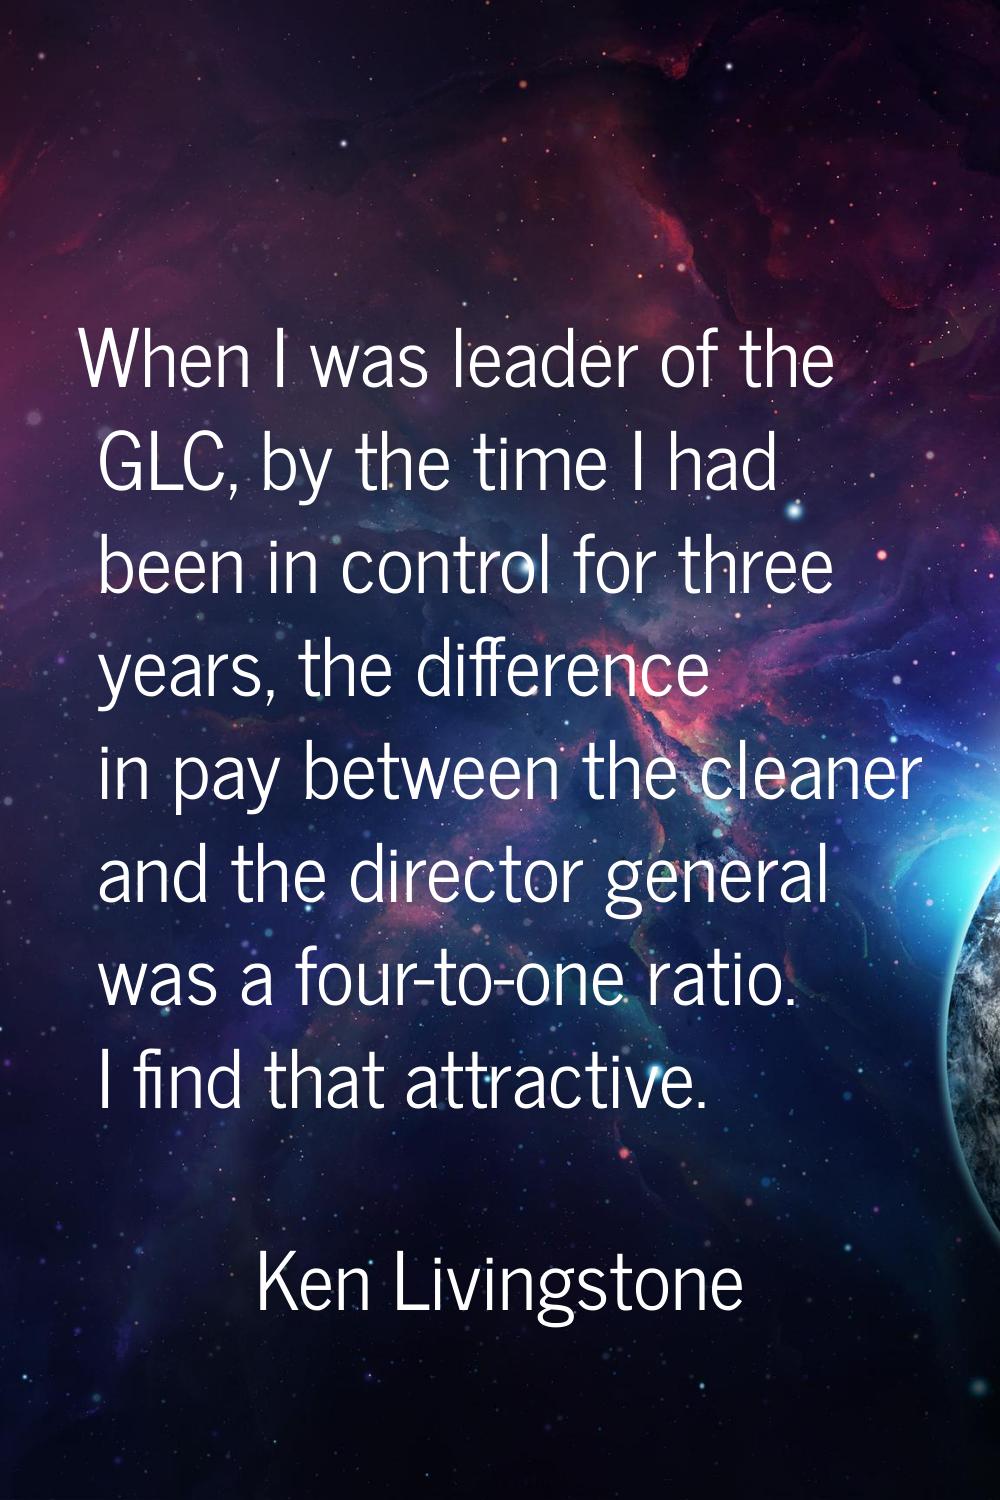 When I was leader of the GLC, by the time I had been in control for three years, the difference in 